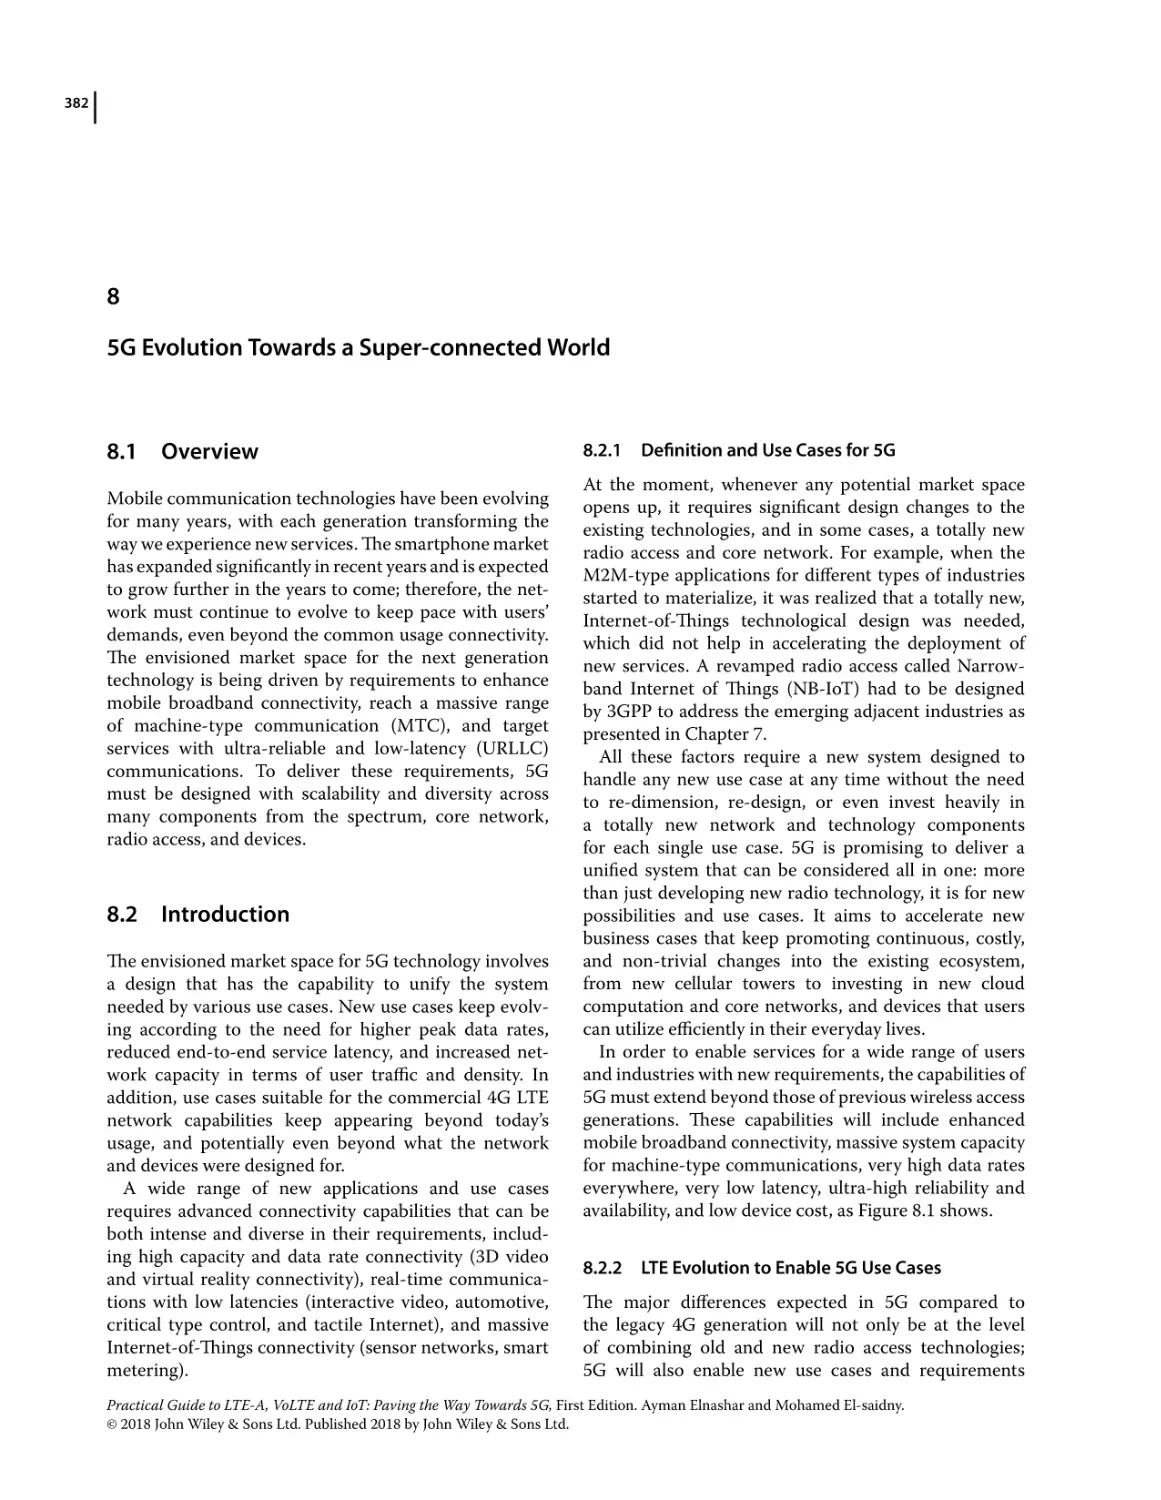 Chapter 8 5G Evolution Towards a Super‐connected World
8.1 Overview
8.2 Introduction
8.2.1 Definition and Use Cases for 5G
8.2.2 LTE Evolution to Enable 5G Use Cases